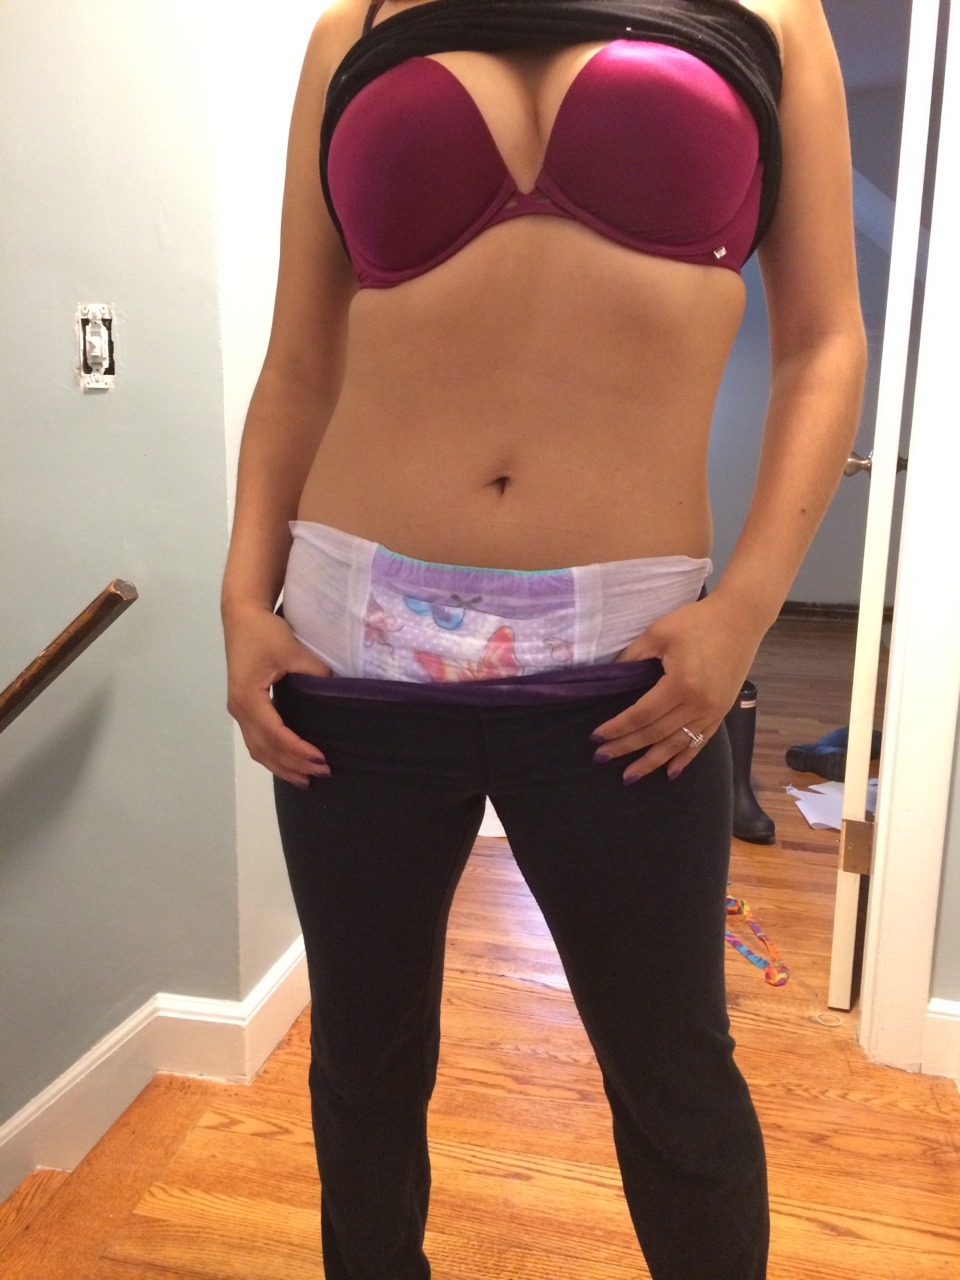 diaperman55:  Featuring baby M. all padded up under her yoga pants!